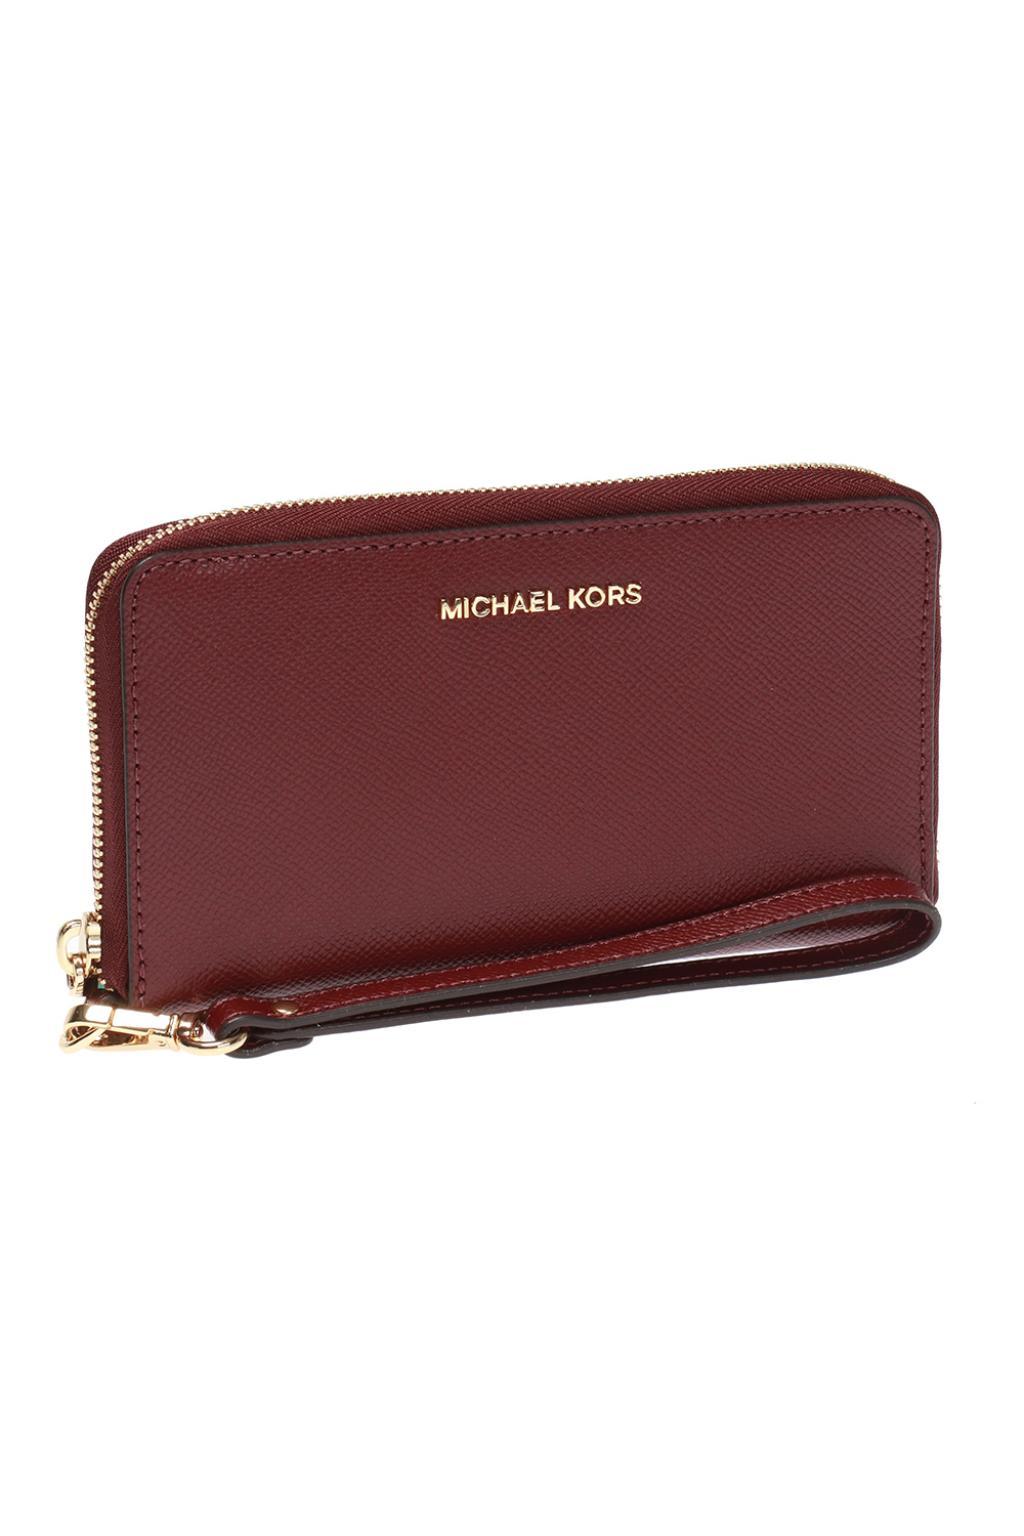 Michael Kors Leather Wallet With A 